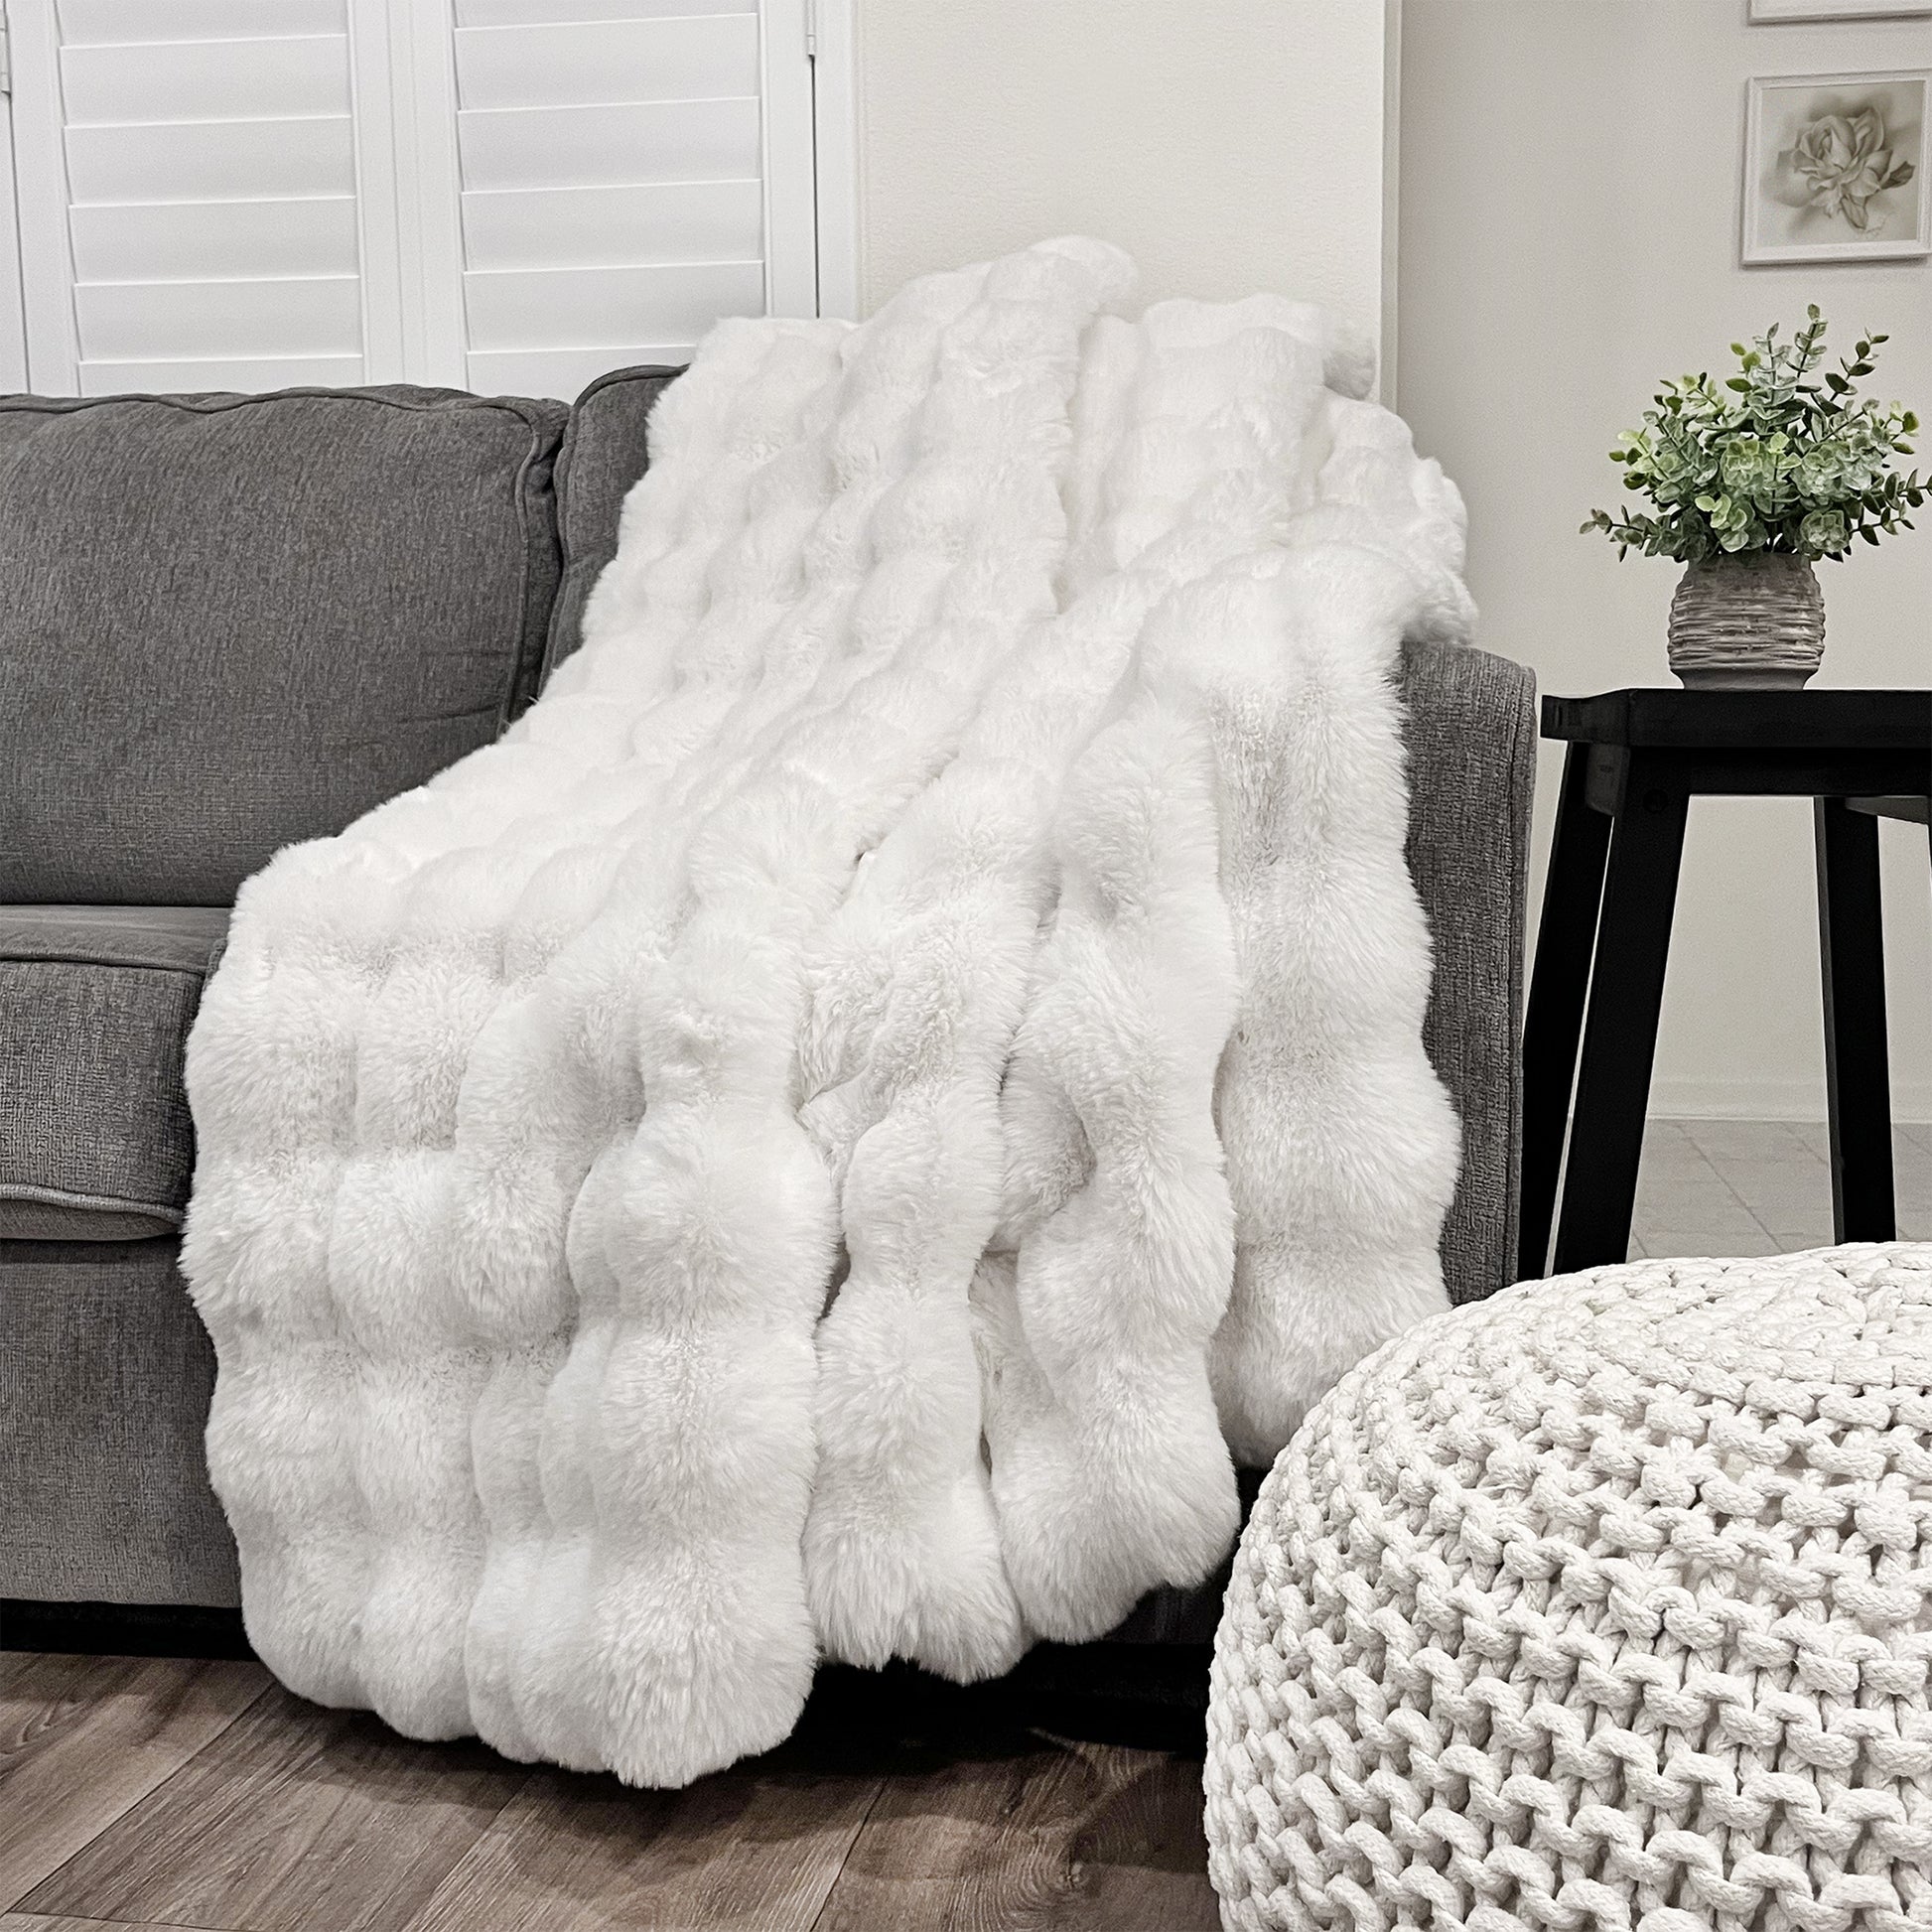 The Mood Cubby Faux Fur Throw, 50x60 in., White